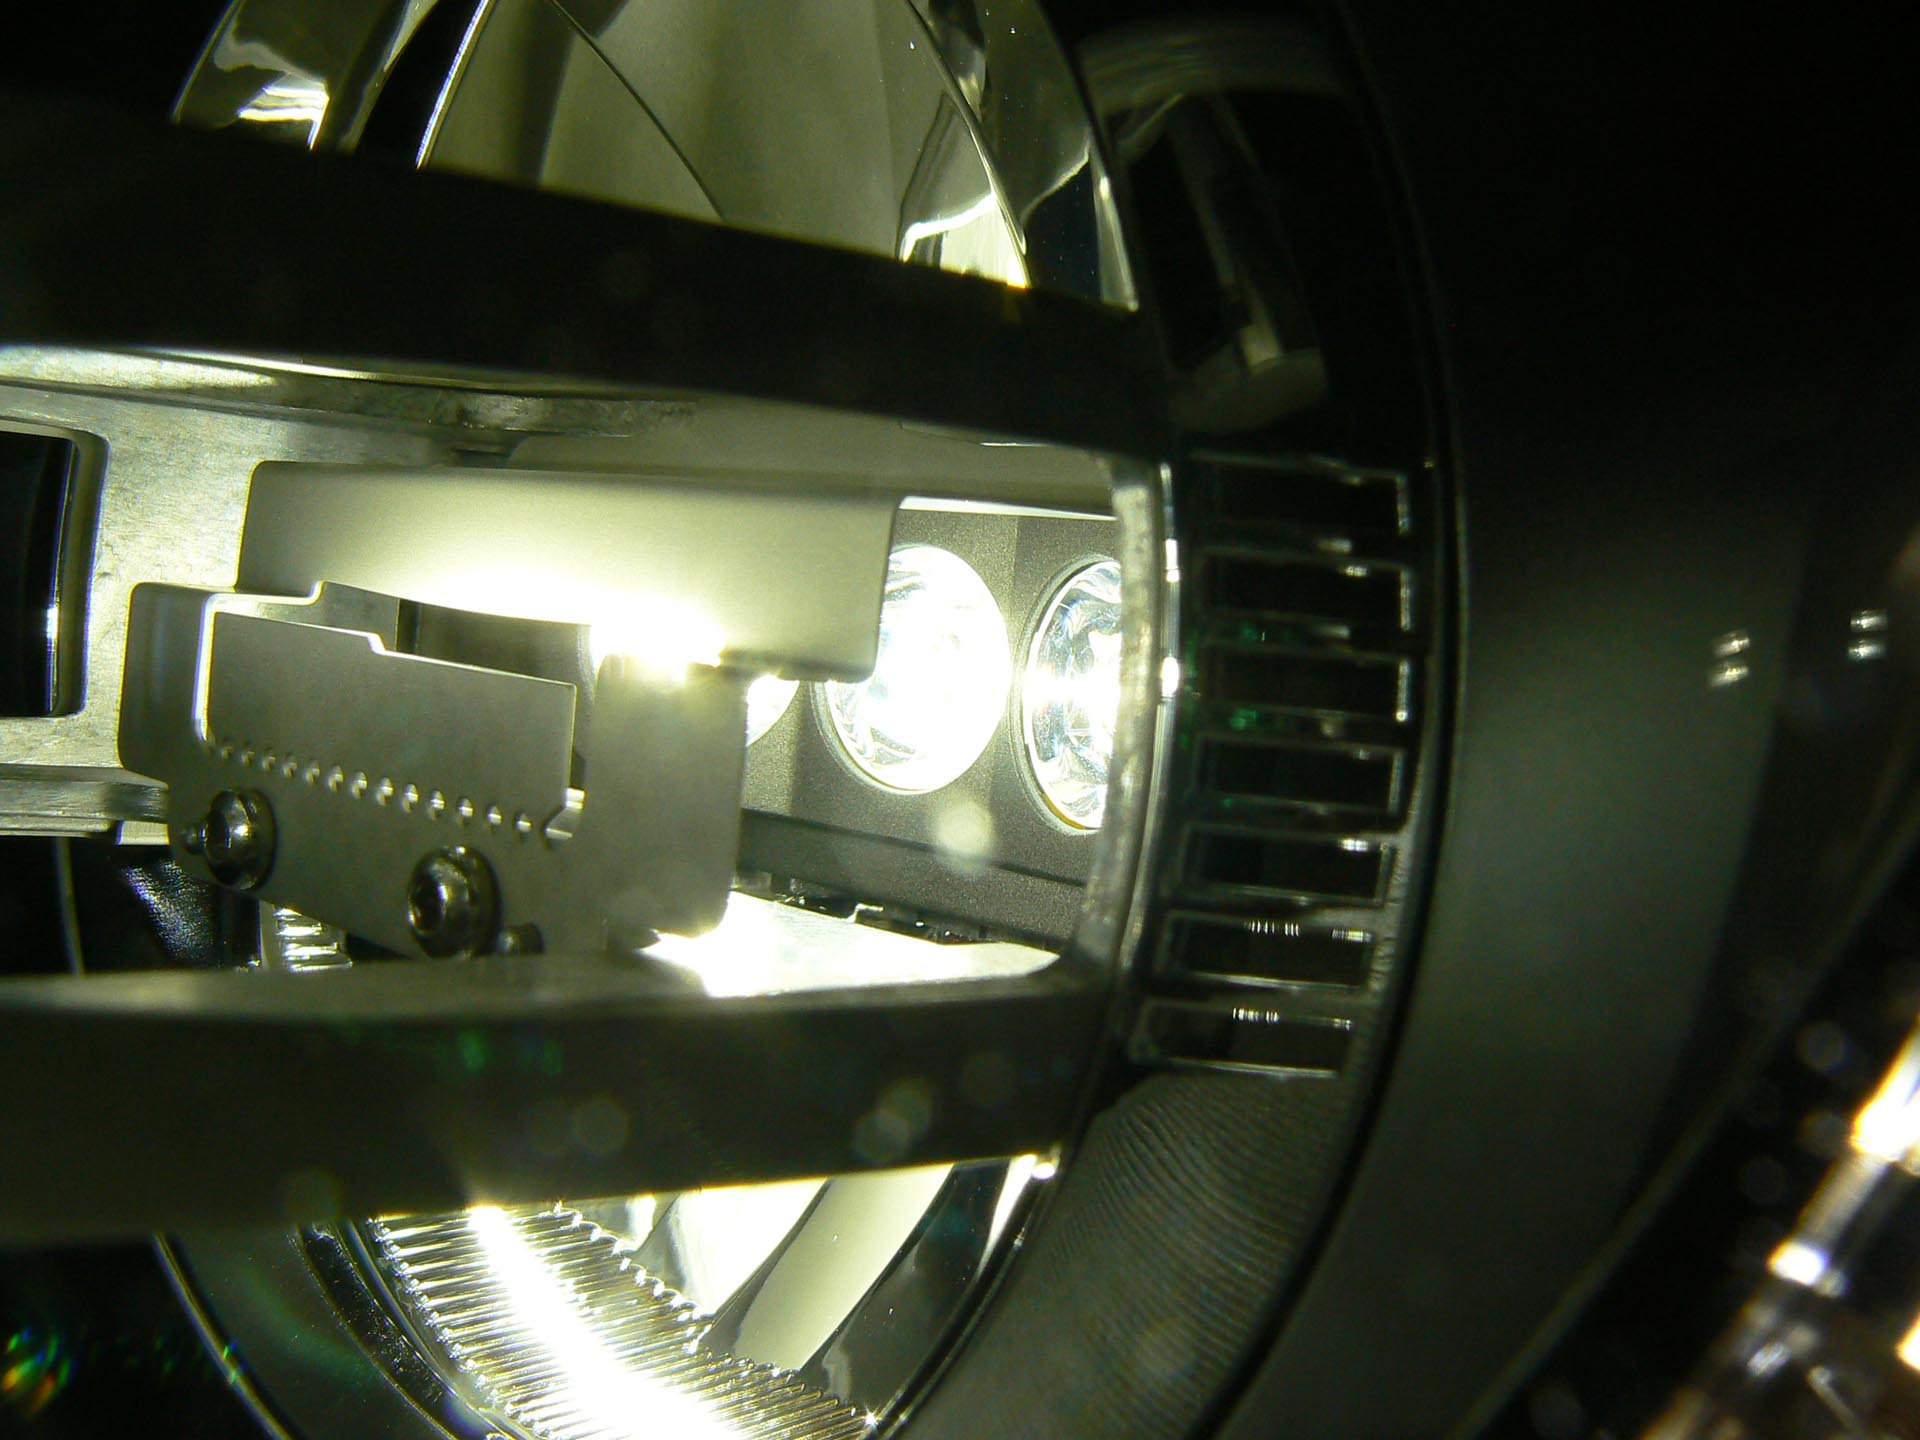 LED lighting technology is relatively expensive up front, and can be sensitive to high-temperature environments. Without very careful heat-sinking, LED lighting systems can suffer damage if used in an area with a high ambient temperature. Here is a close-up of an early LED headlight system, in a 2011 Audi R8.